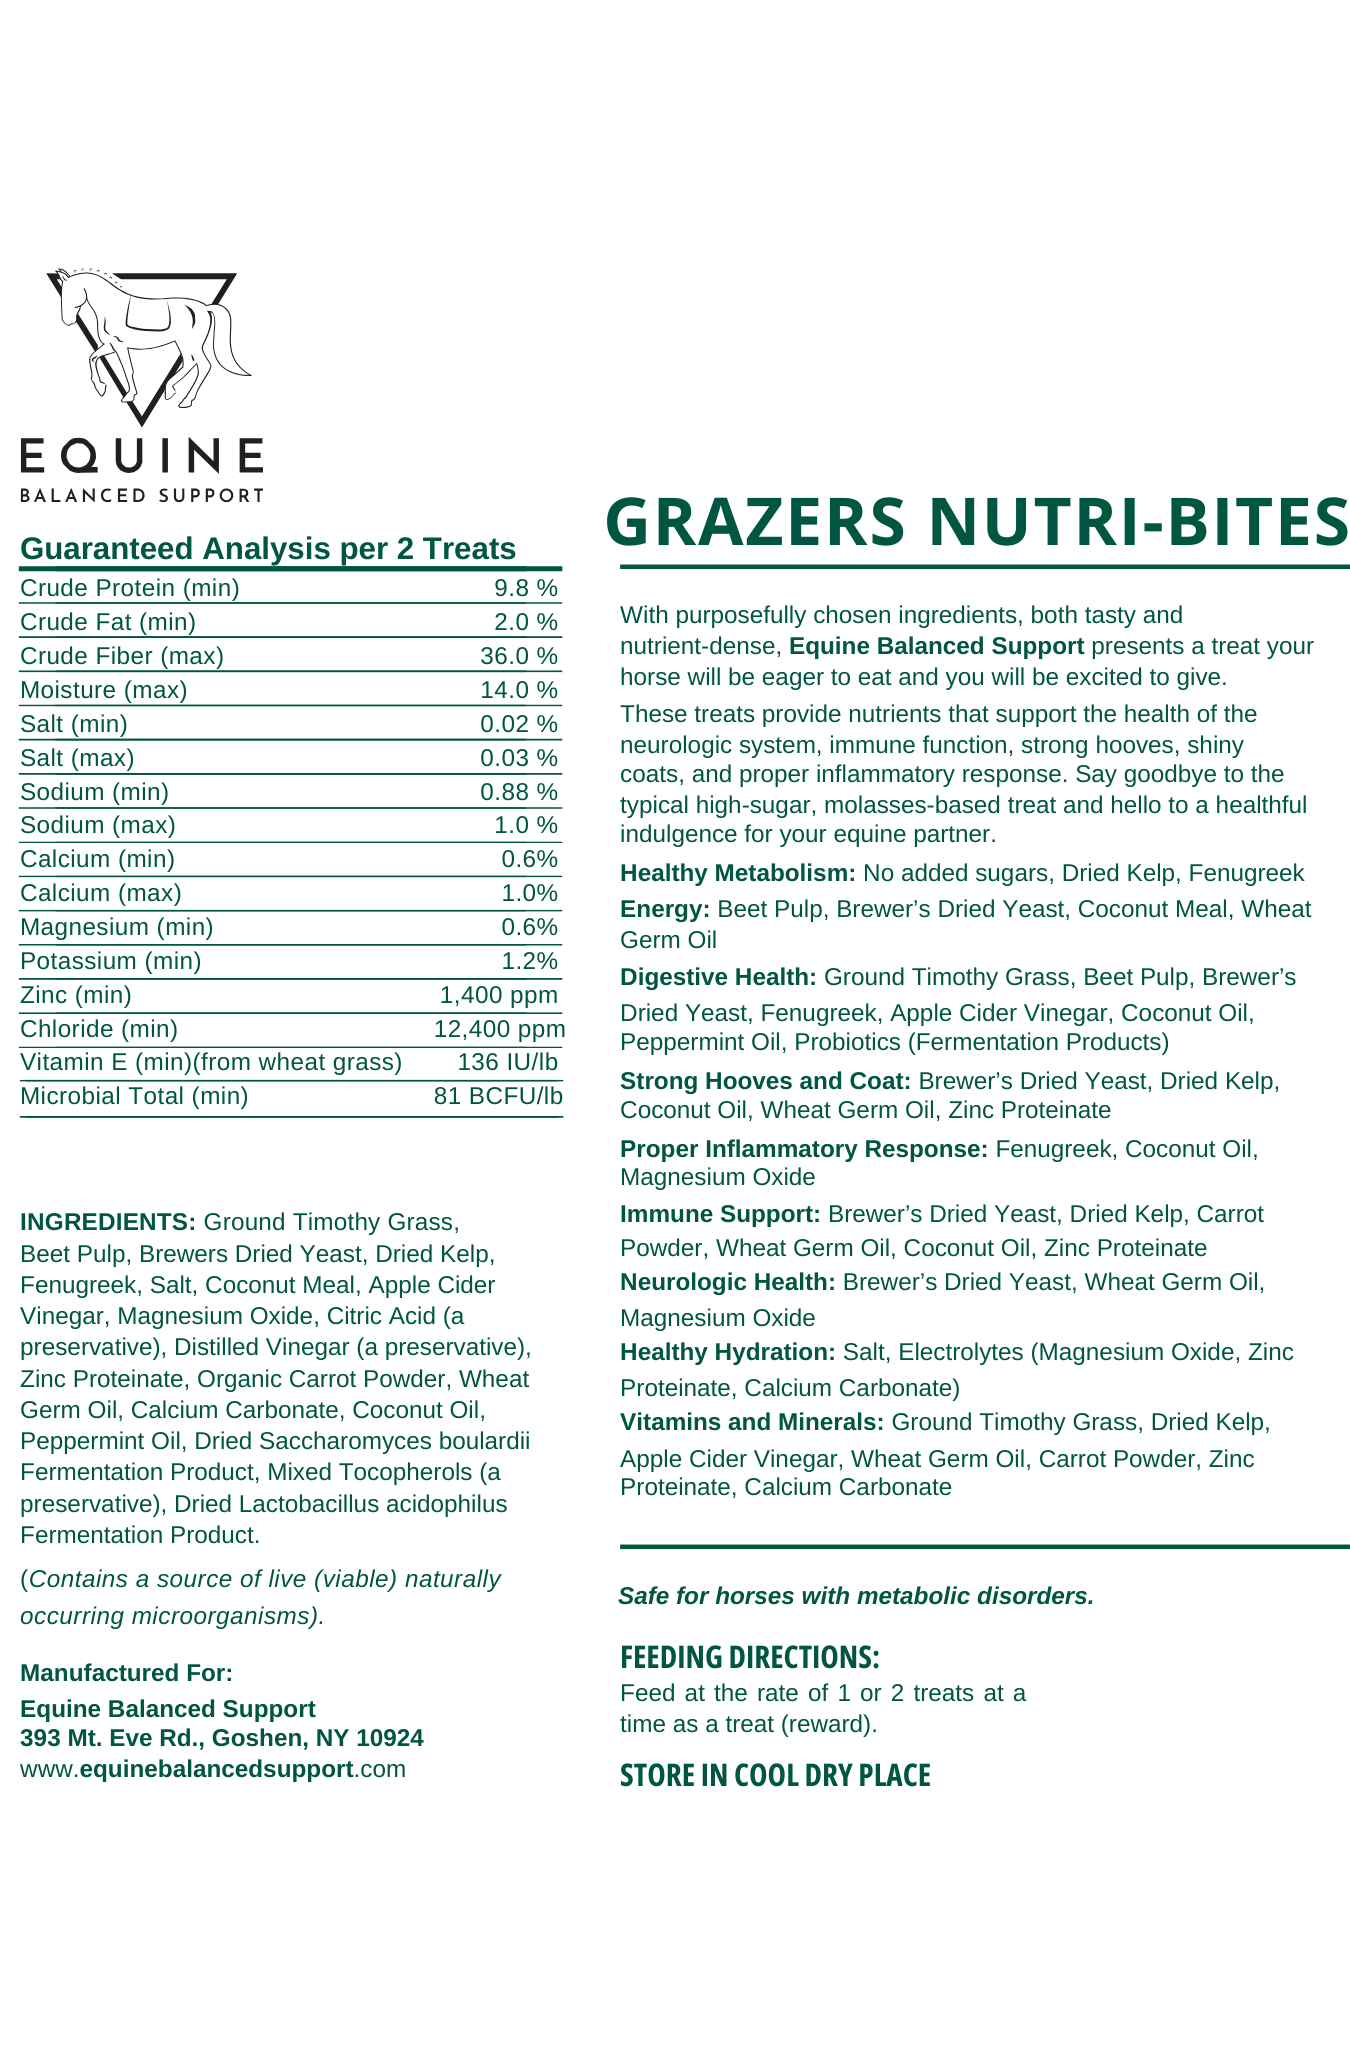 Information for Grazers Nutri-Bites Horse Treats! Safe for horses with metabolic issues, no added sugar, and full of nutrients! Promotes healthy metabolism, energy production, digestive health, strong hooves and coats, proper inflammatory response, immune support, neurologic health, healthy hydration, and includes essential vitamins and minerals!